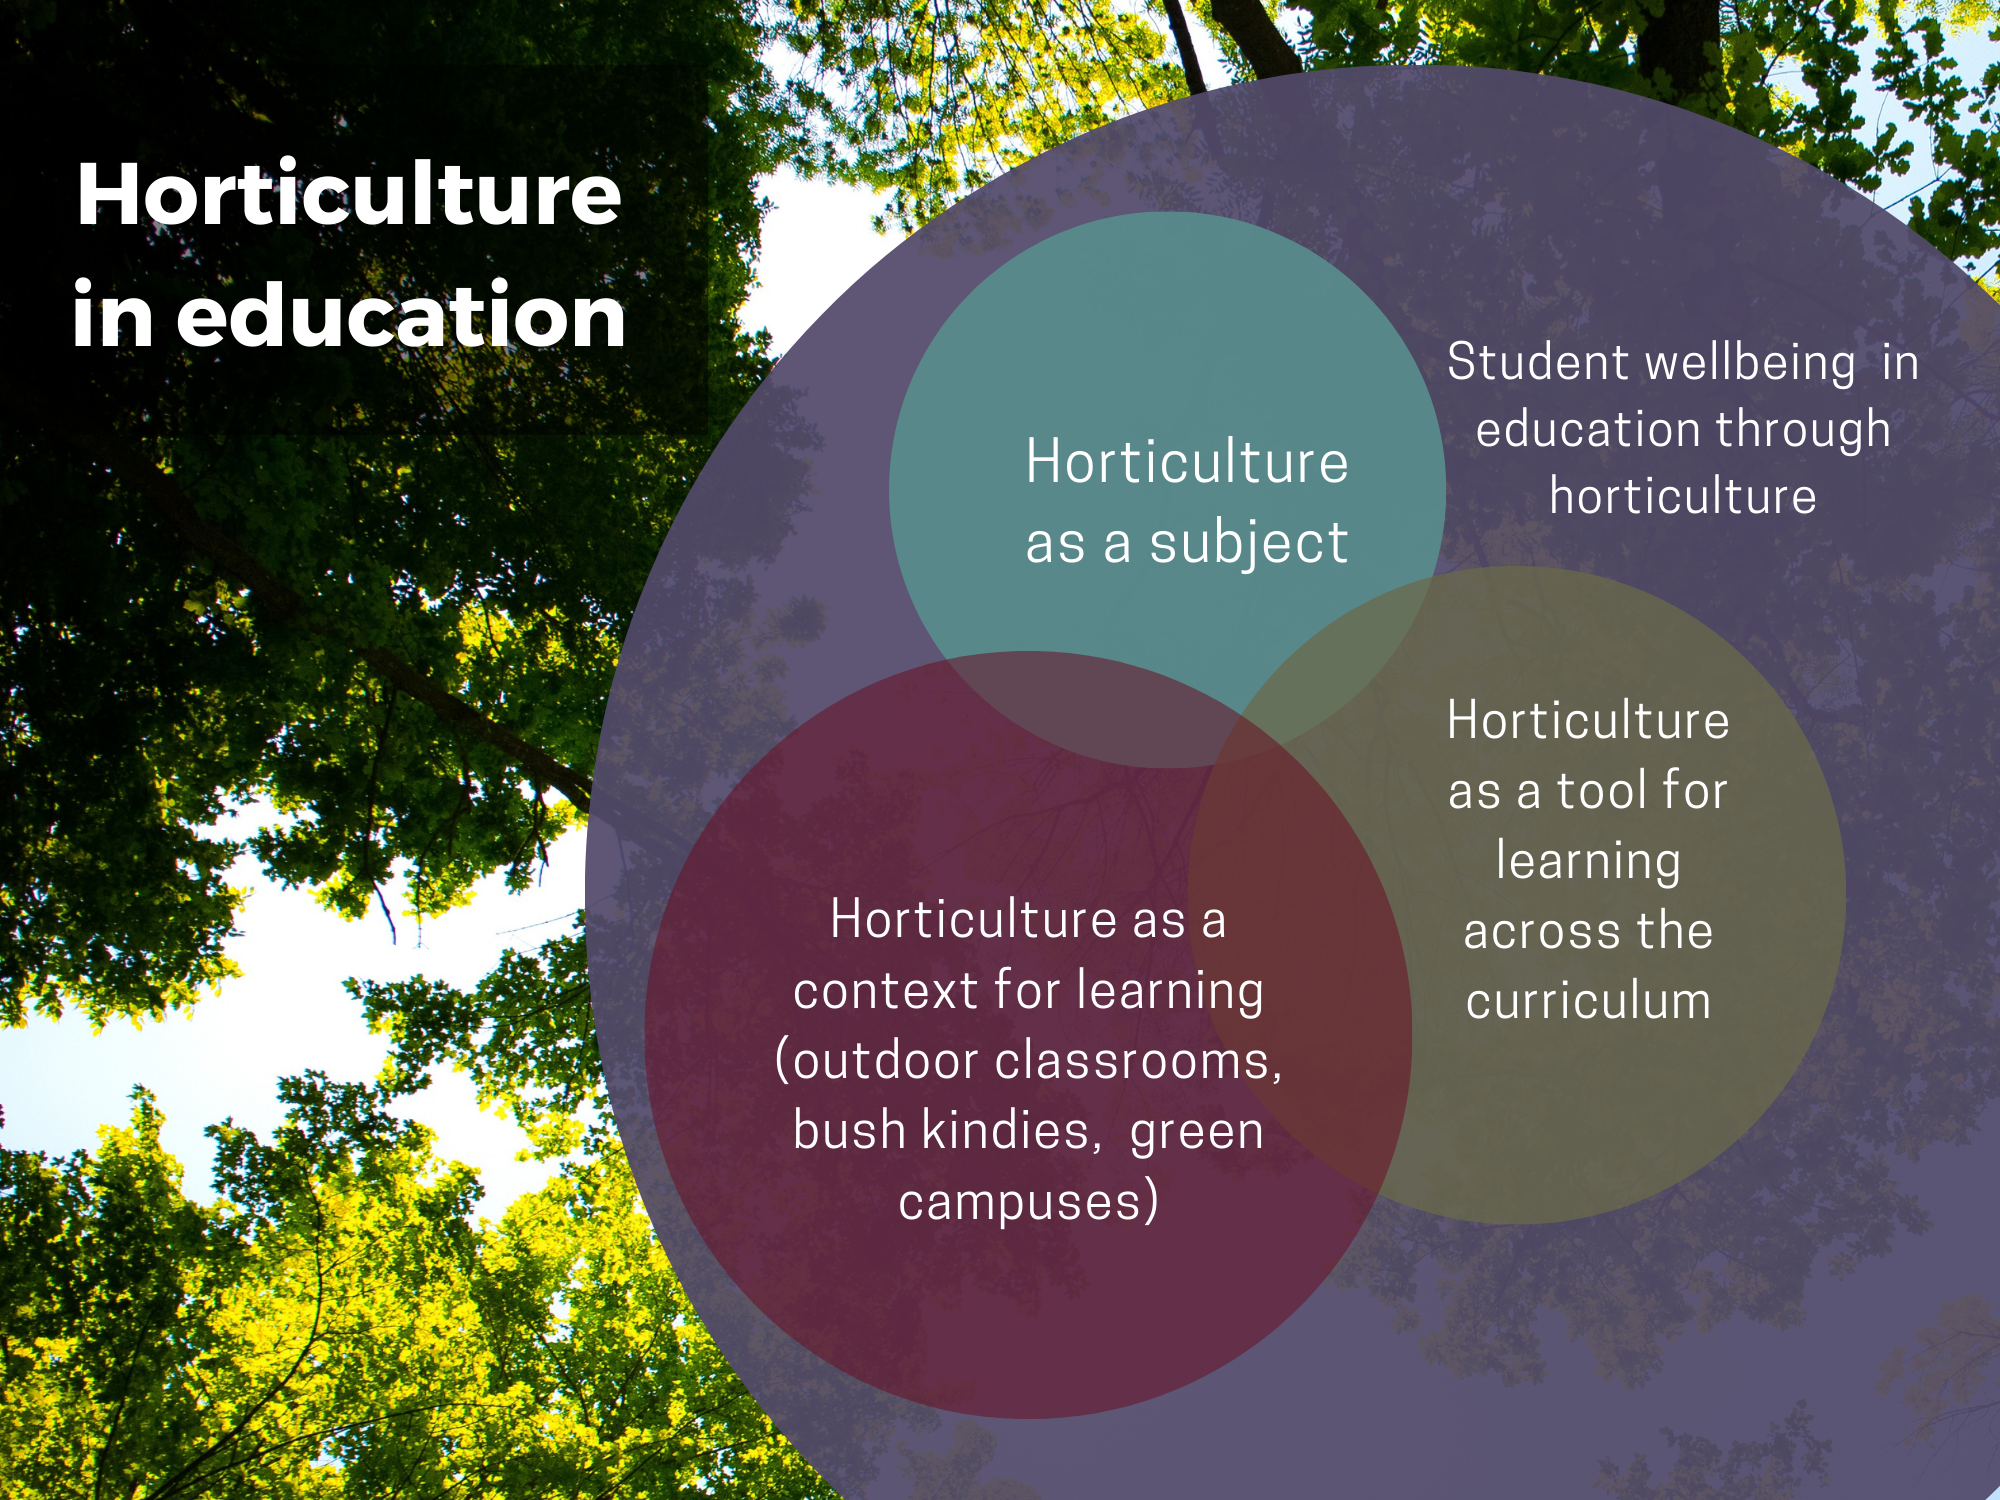 Conceptualising horticulture in education as a subject, tool, context and benefit. (Image: Kate Neale)